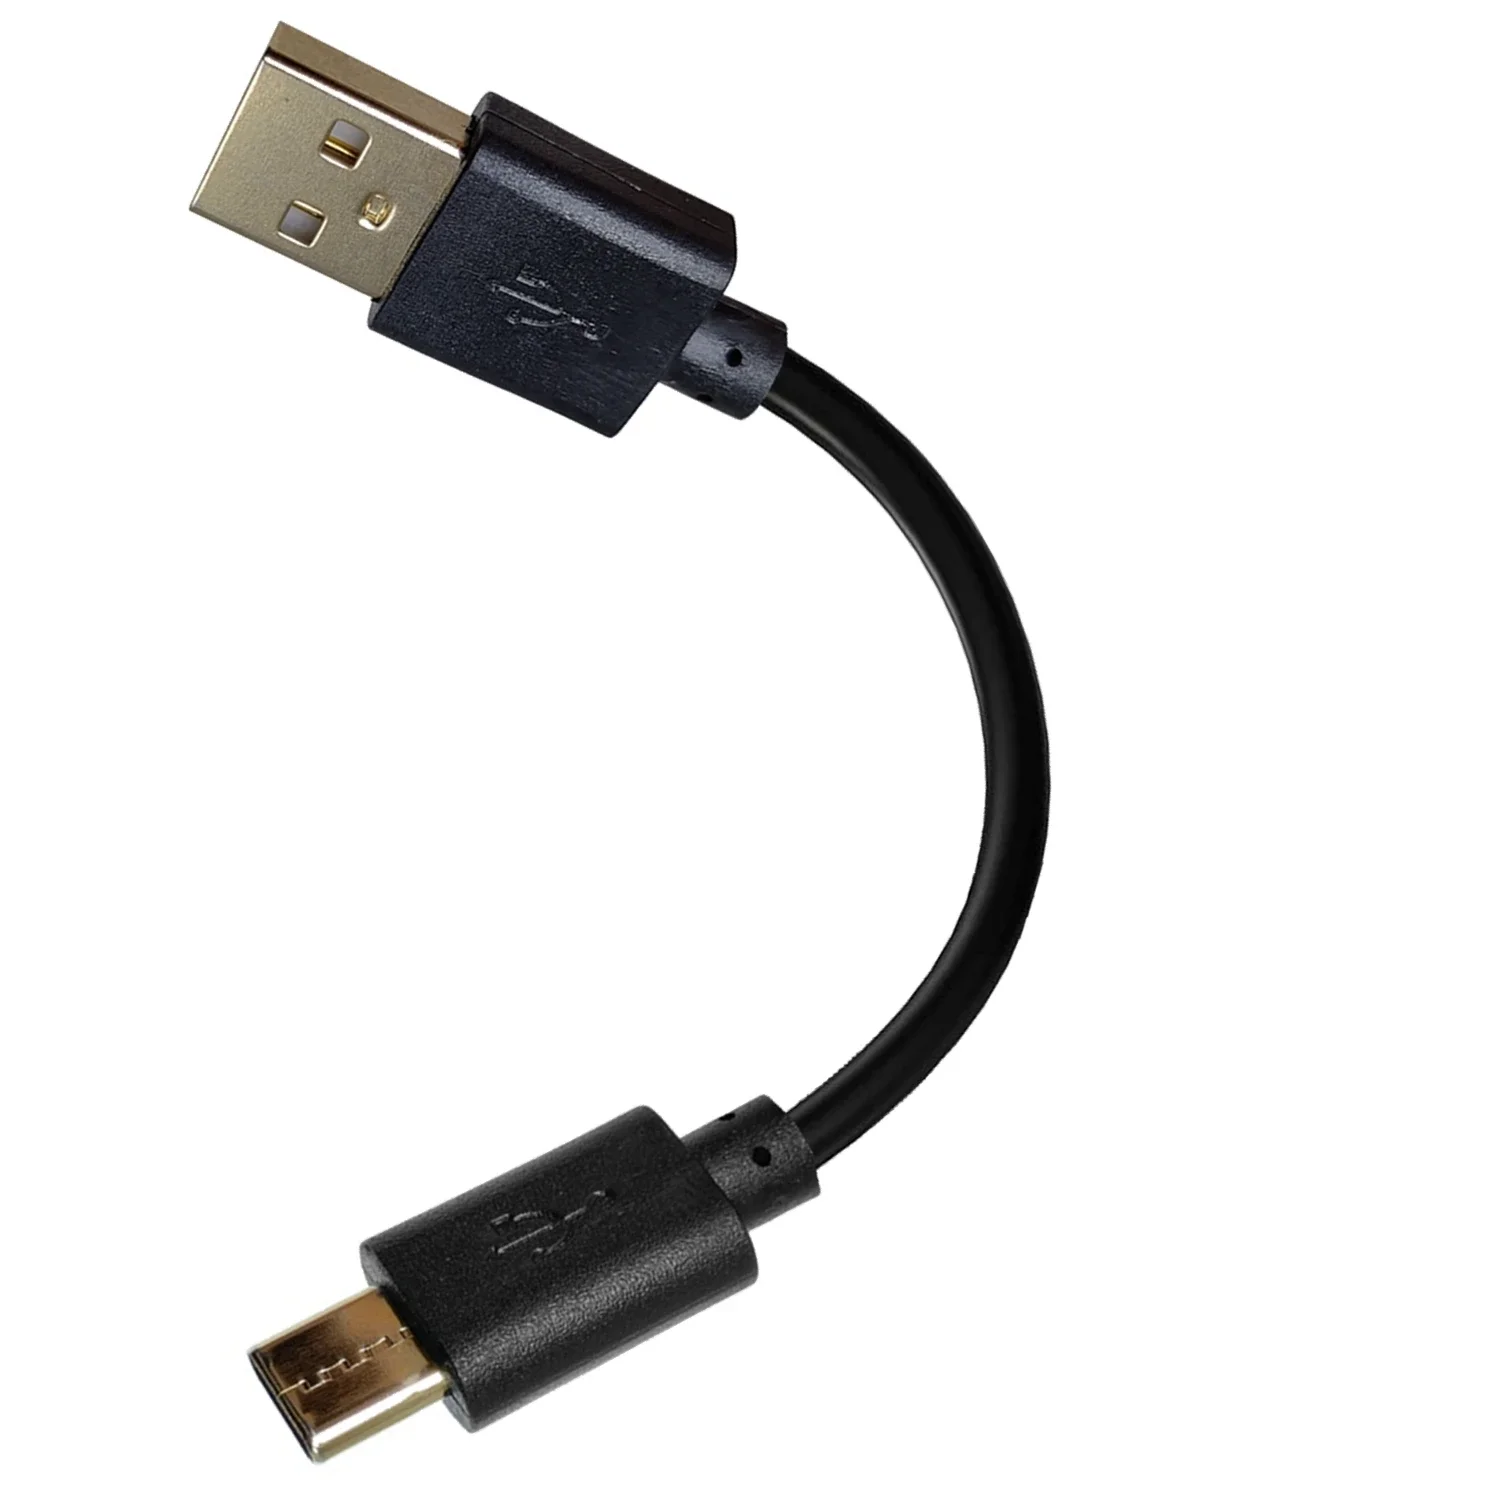 

gold-plating C-type to USB 2.0 male ,suitable for 3A copper data cable for Android phones, tablets, and computers 10CM